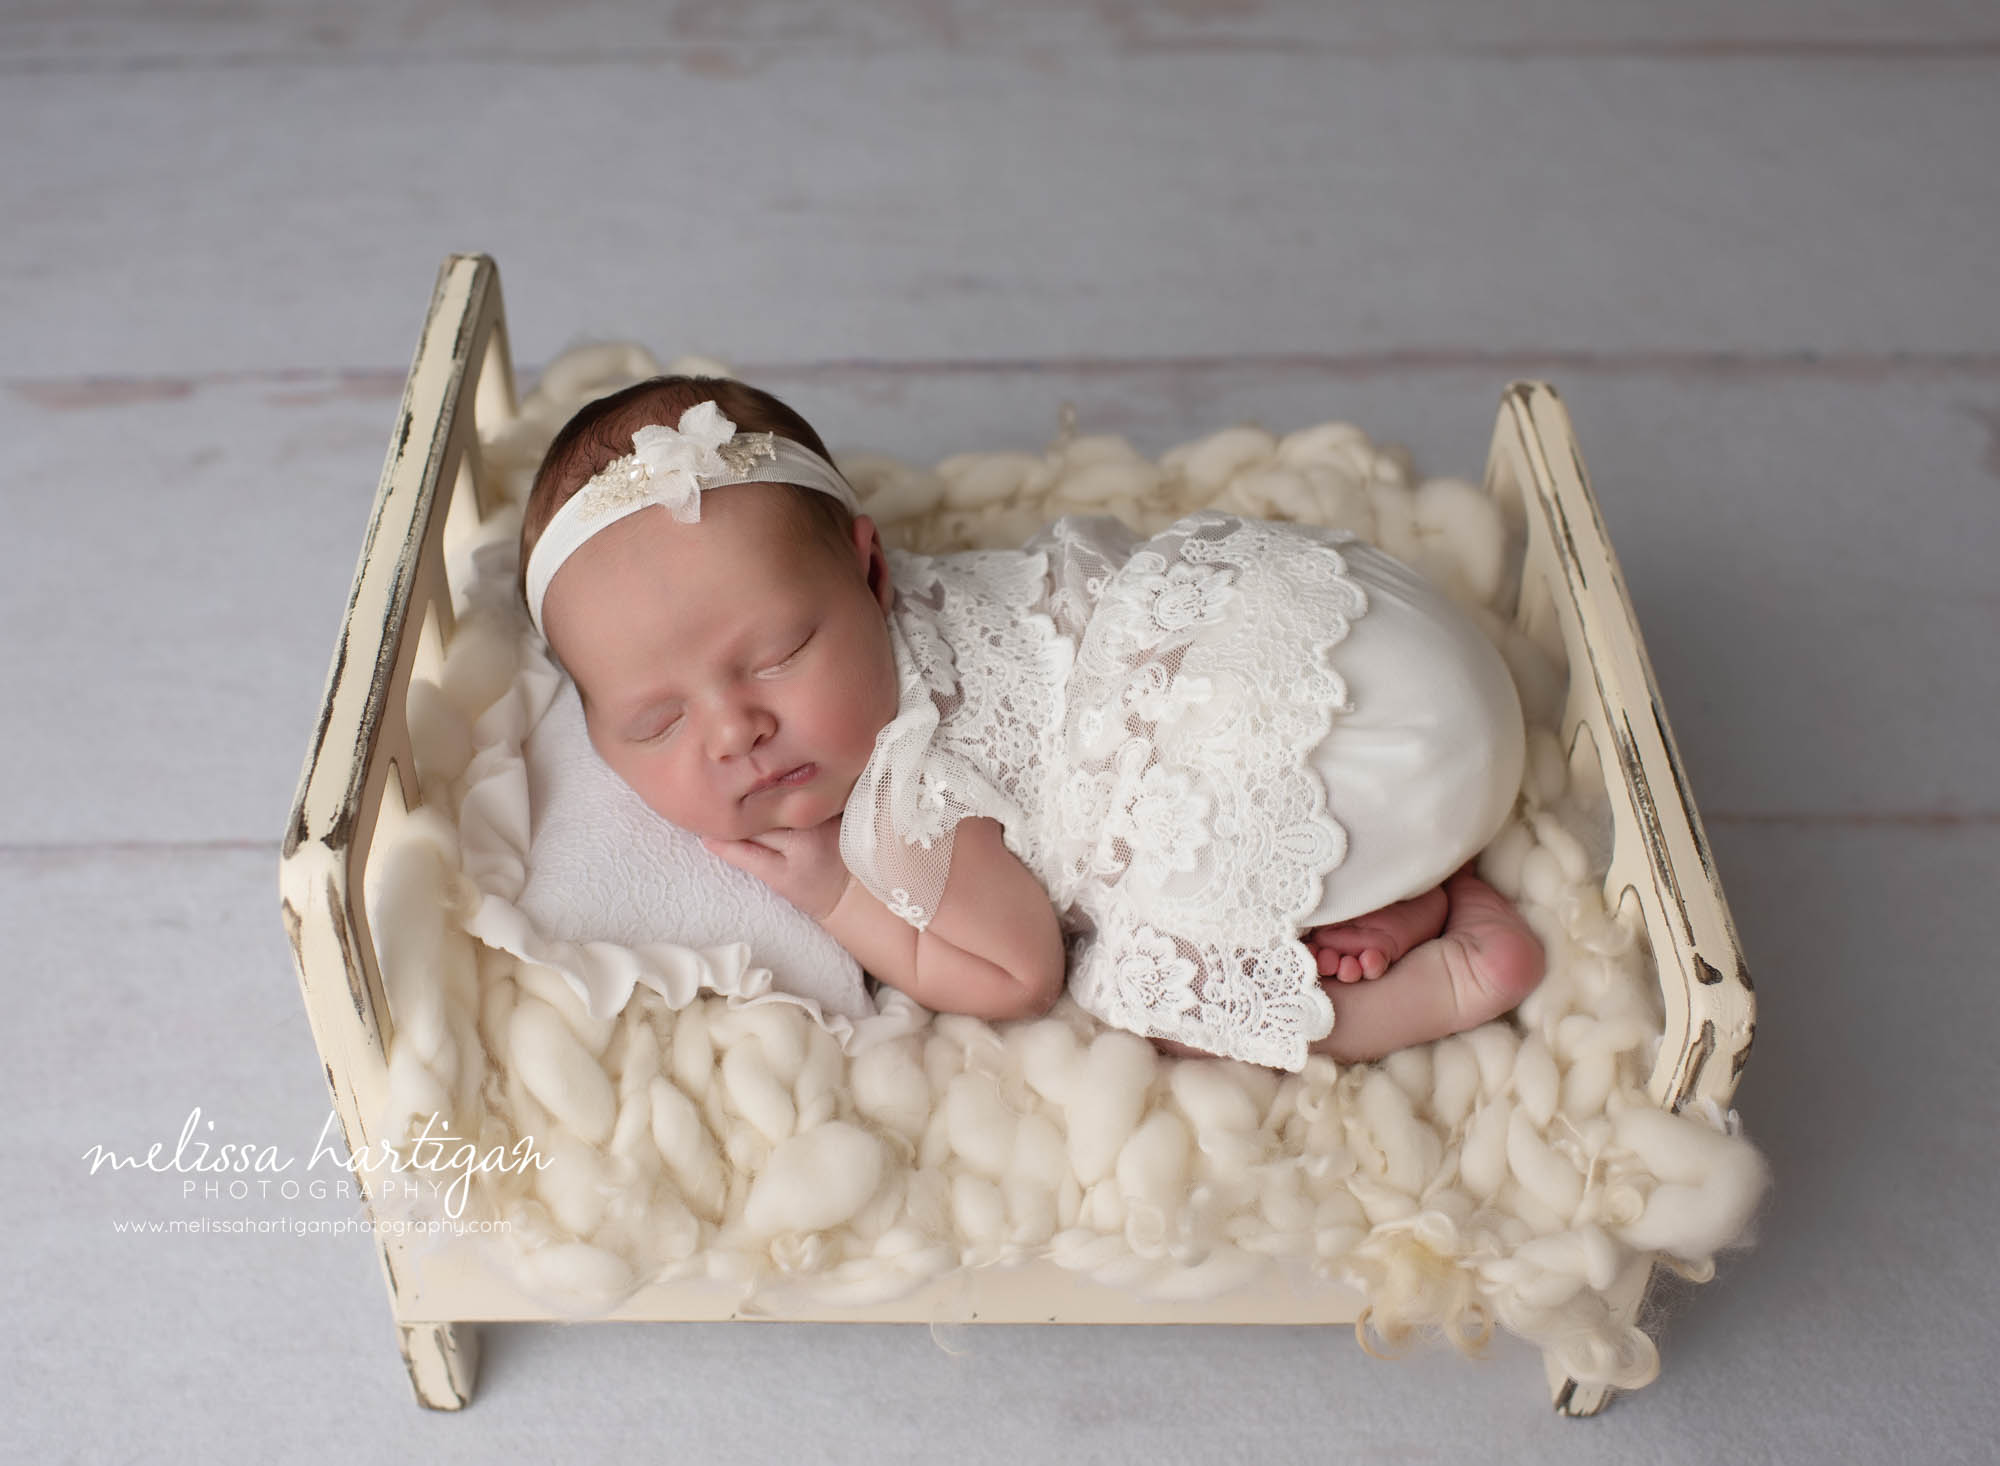 baby girl posed on tummy wearing lace outfit on cream colored wooden bed